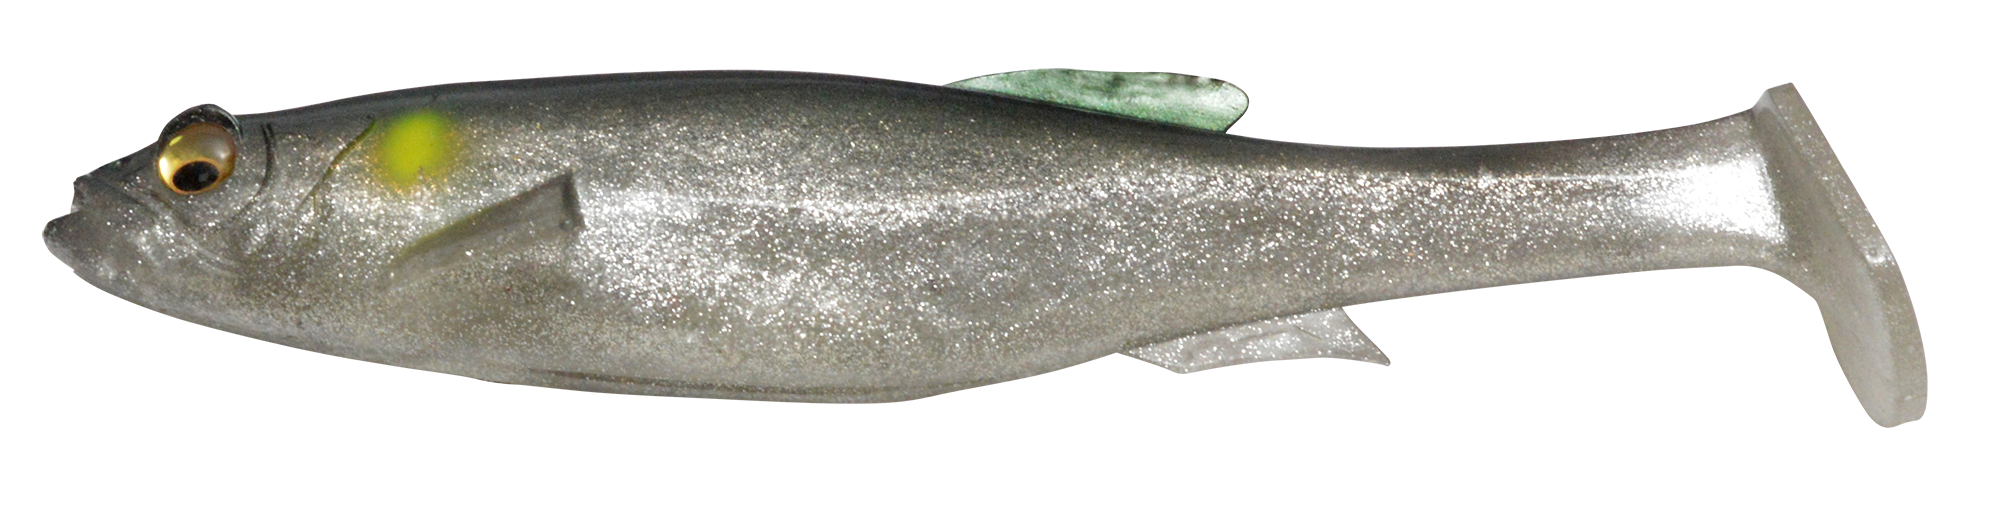 Megabass Magdraft 5” is a sweet swimbait for smallmouth and largemouth  bass. Go get one!  #jandhtackle #fishing  #bassfishing, By J&H Tackle